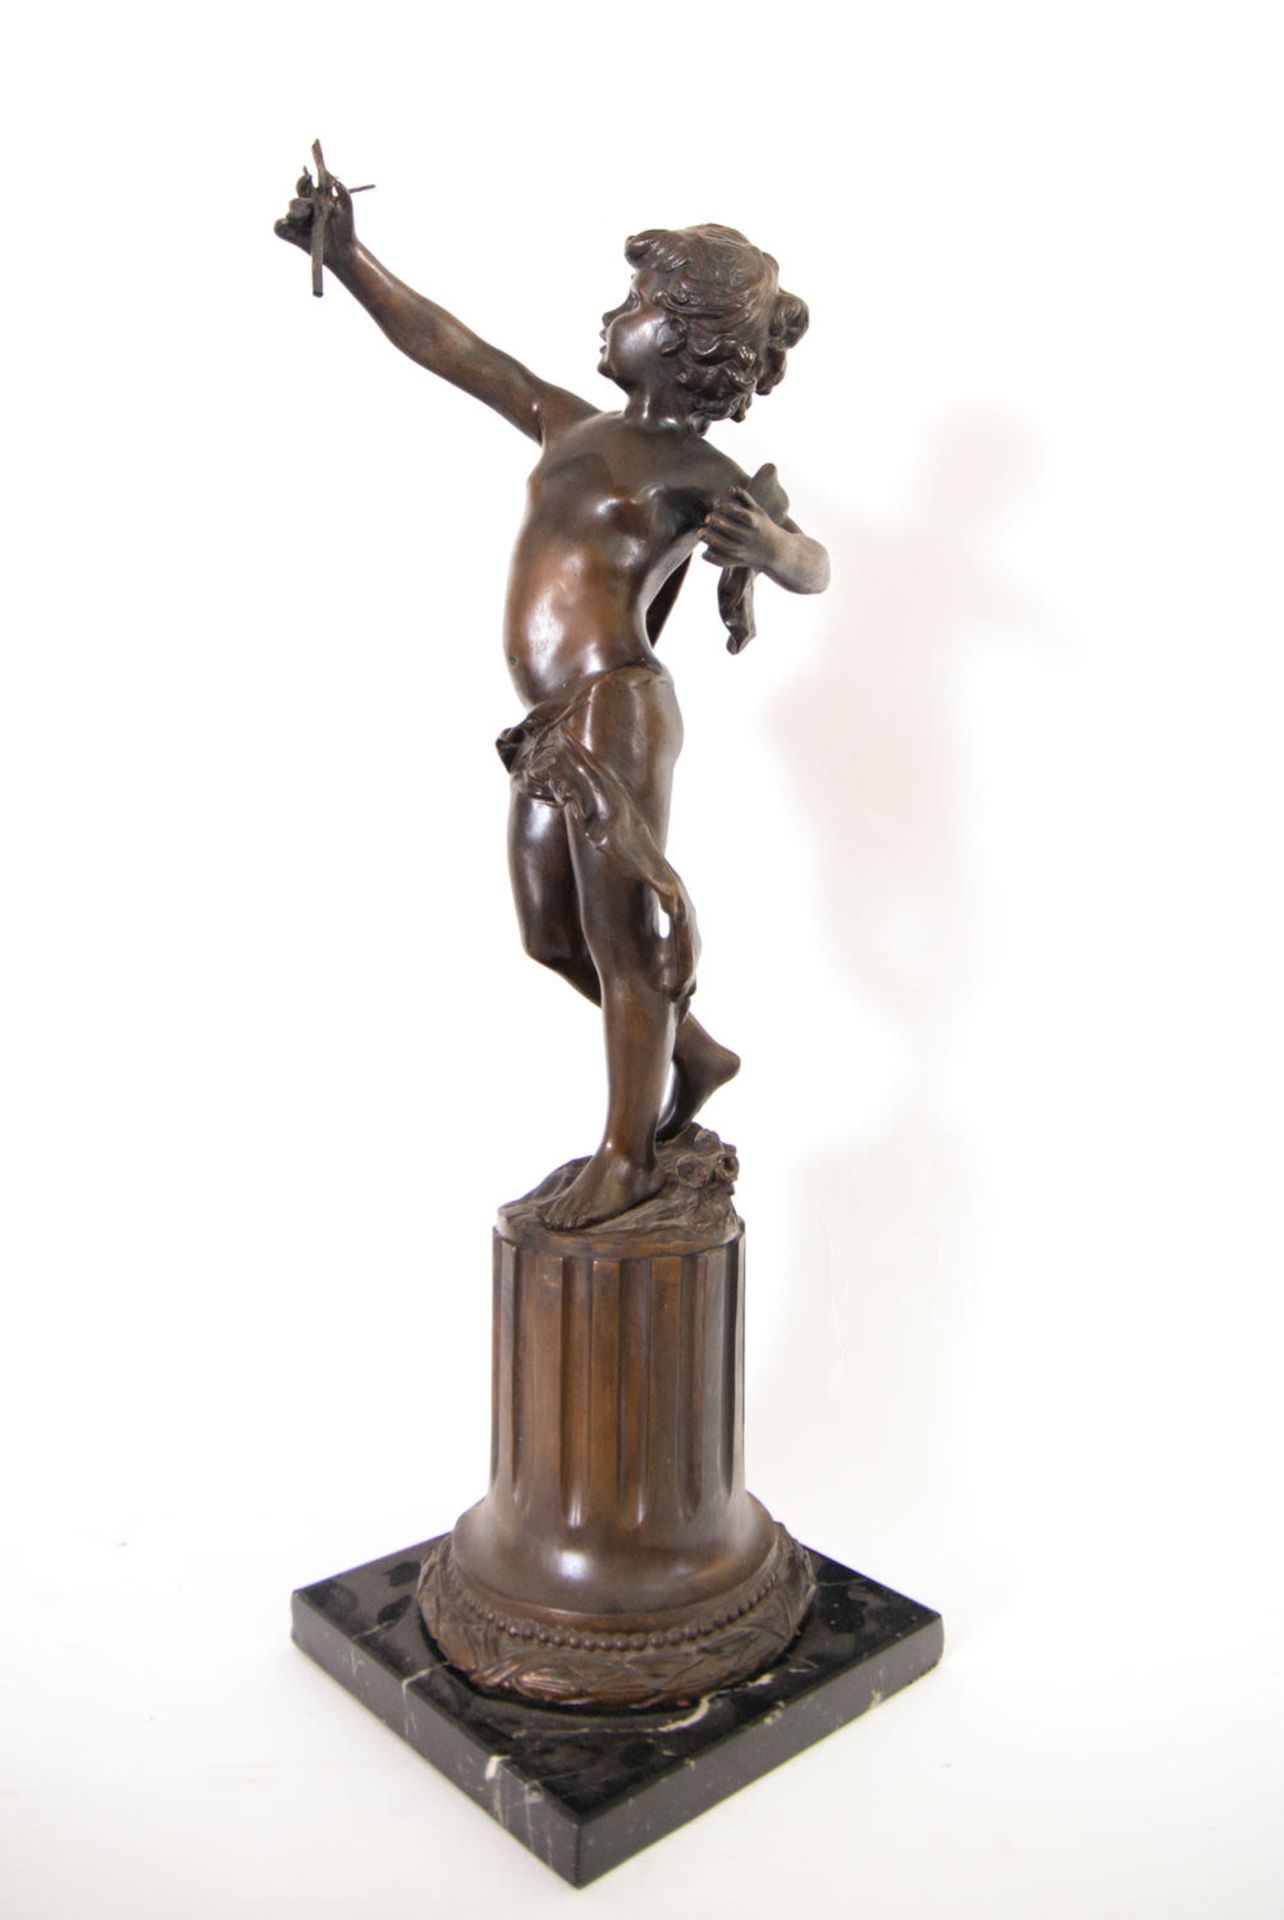 Pair of Important Cupids in Patinated Bronze, French School of the 19th Century - Image 3 of 8